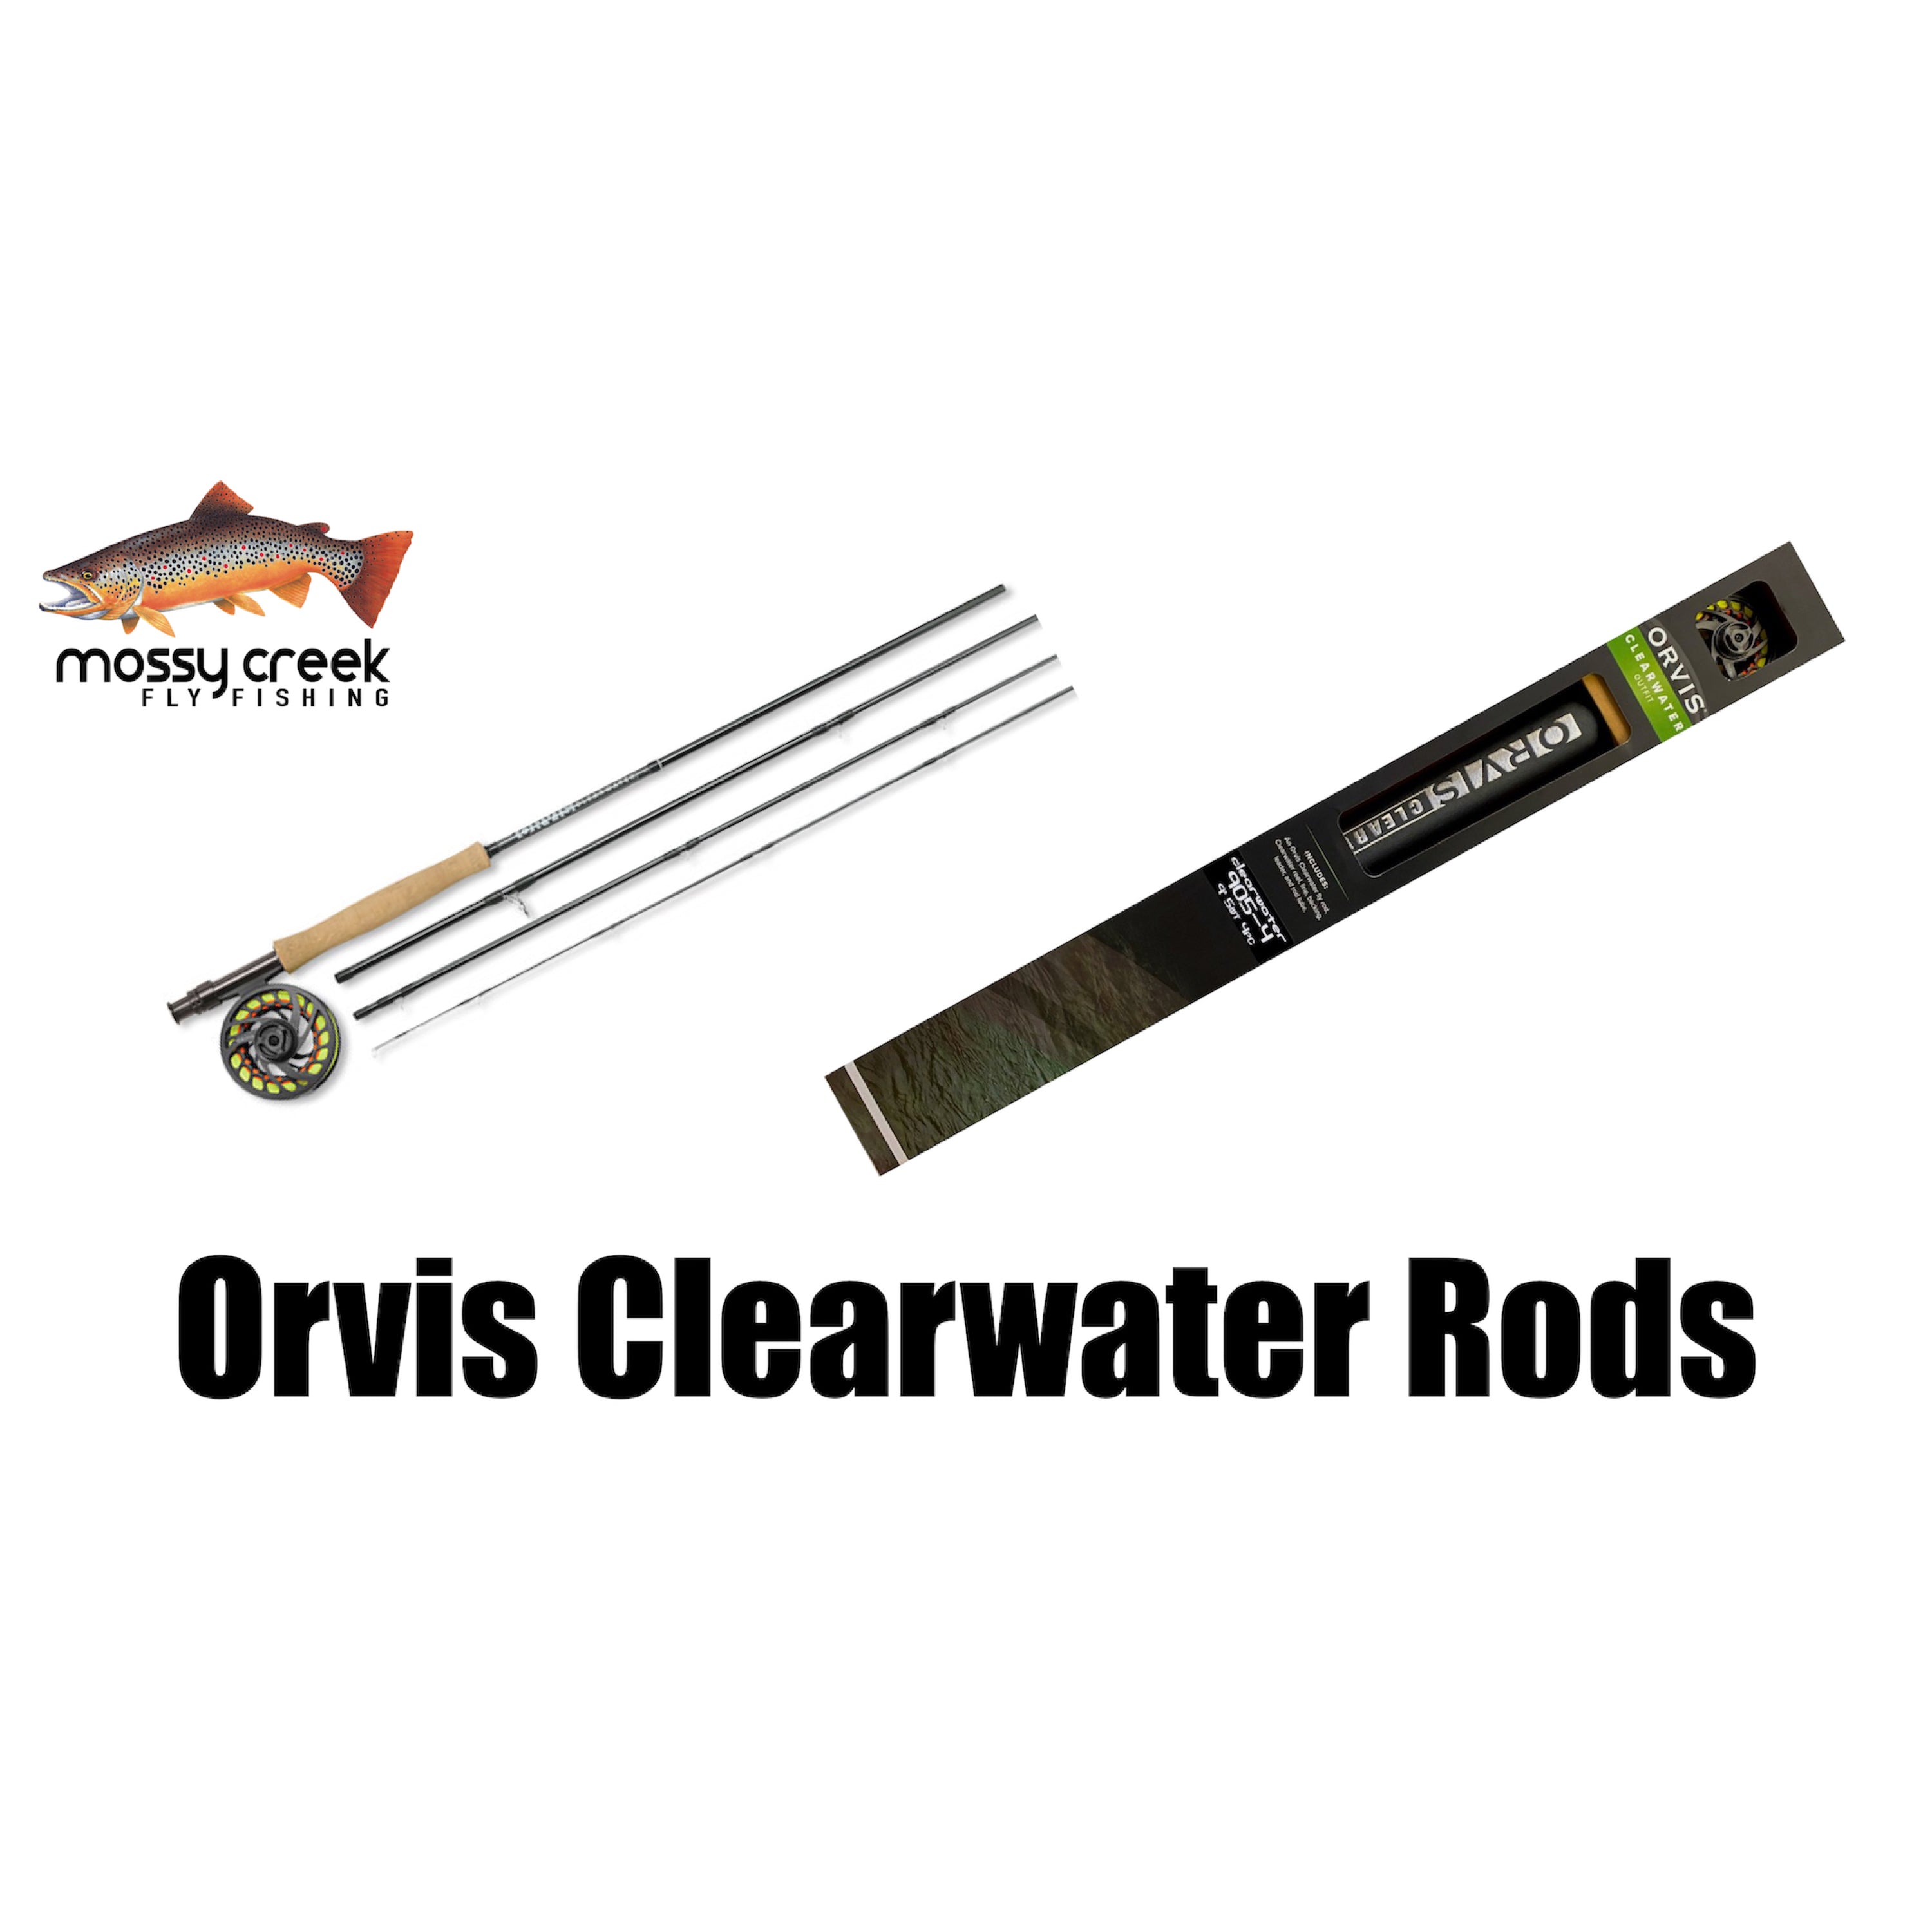 Mossy Creek Product Review: Orvis Clearwater Fly Rod